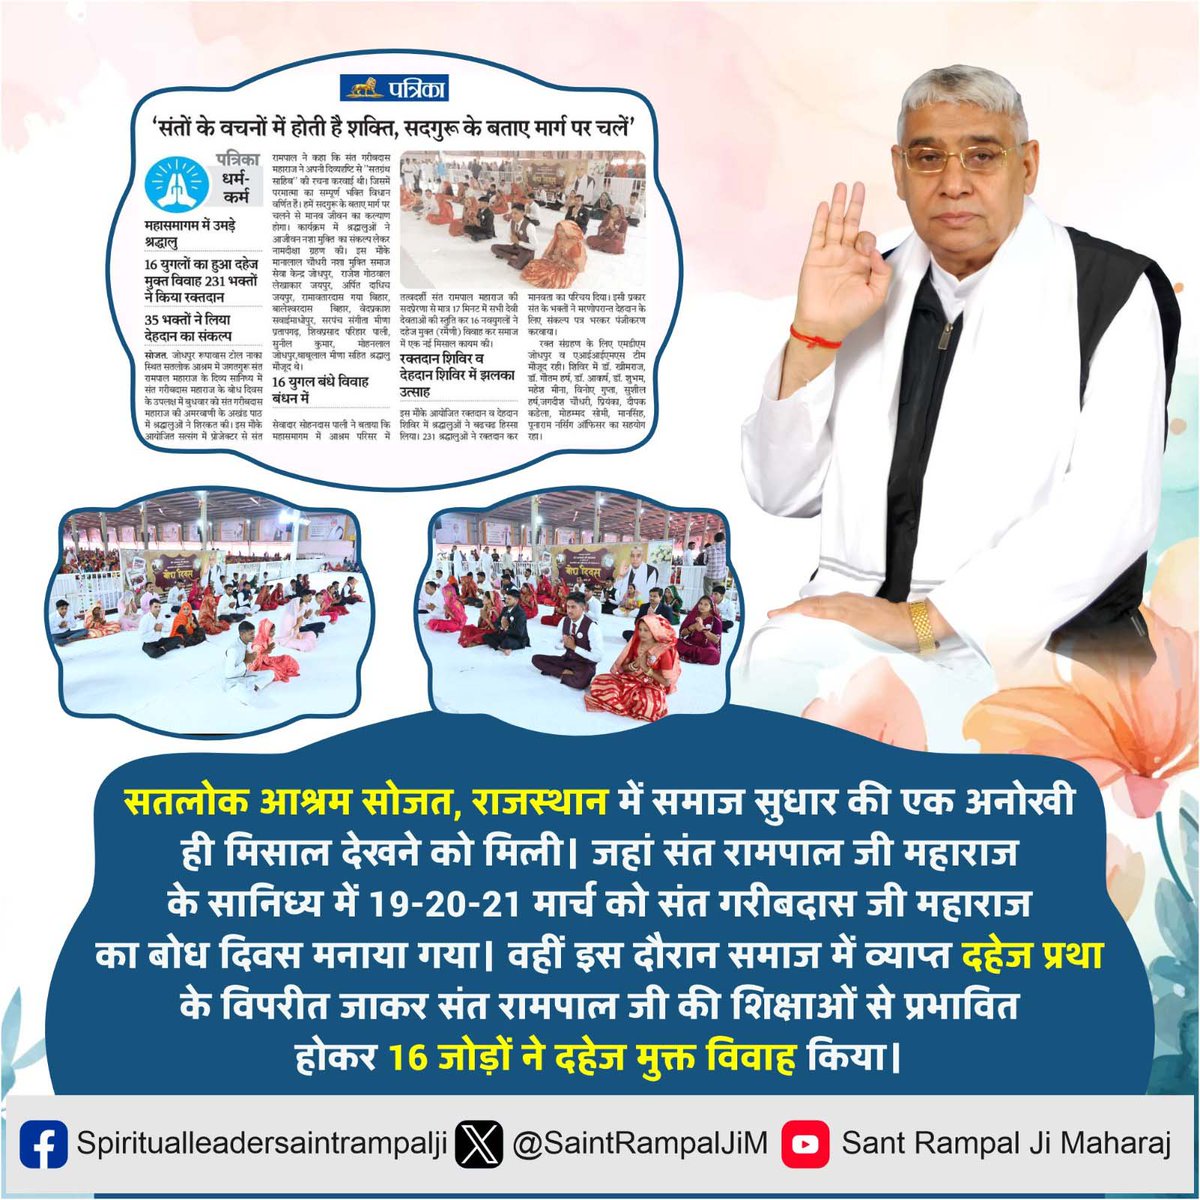 #बिना_आडंबर_के_दहेजमुक्तविवाह Promoting peace & Harmony Dowry Free Marriages Reduce Family disputes and tension associated with dowry demands . Sant Rampal Ji Maharaj